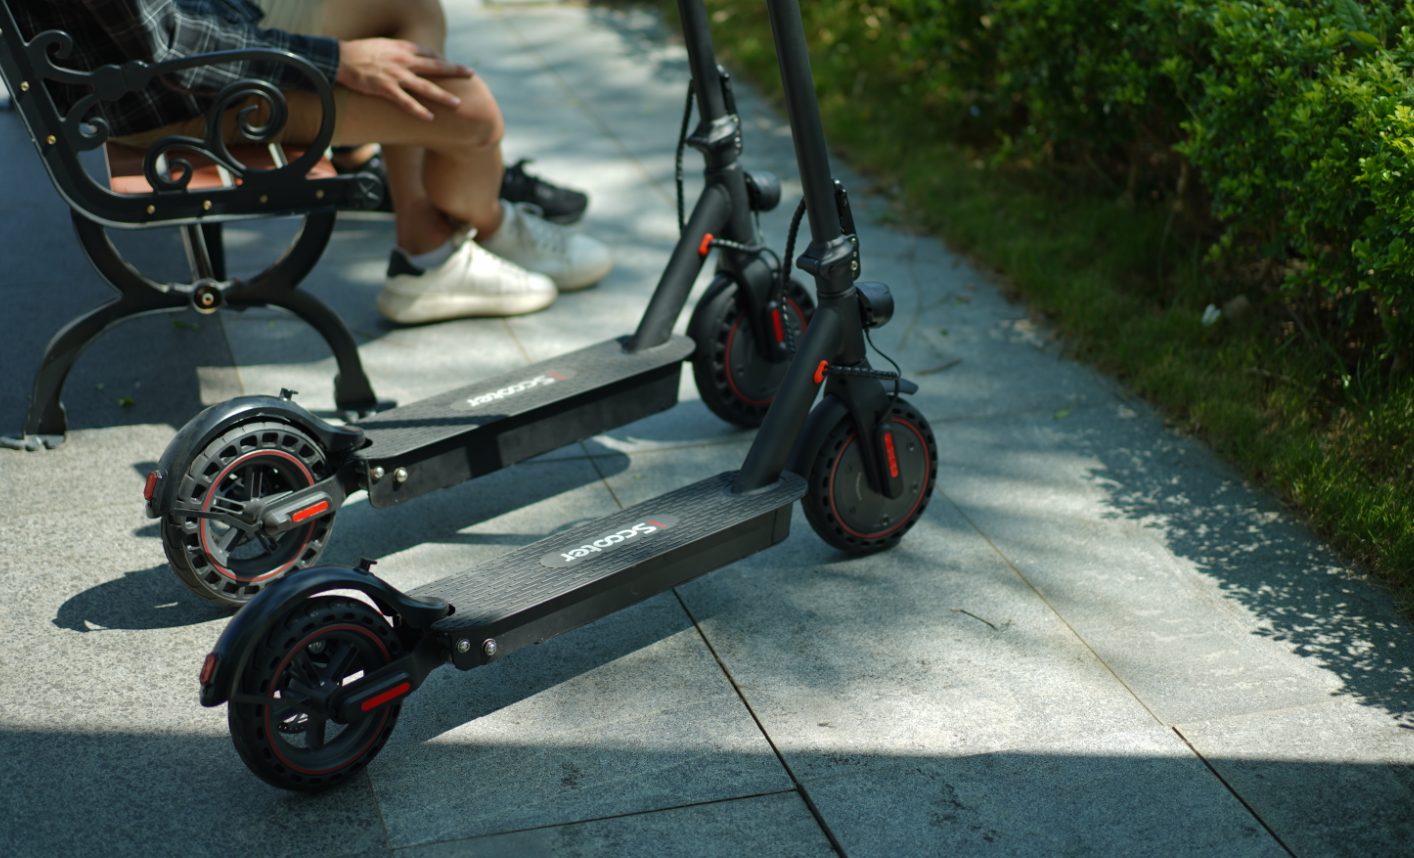 Top 5 Benefits of Using an Electric Scooter for Work